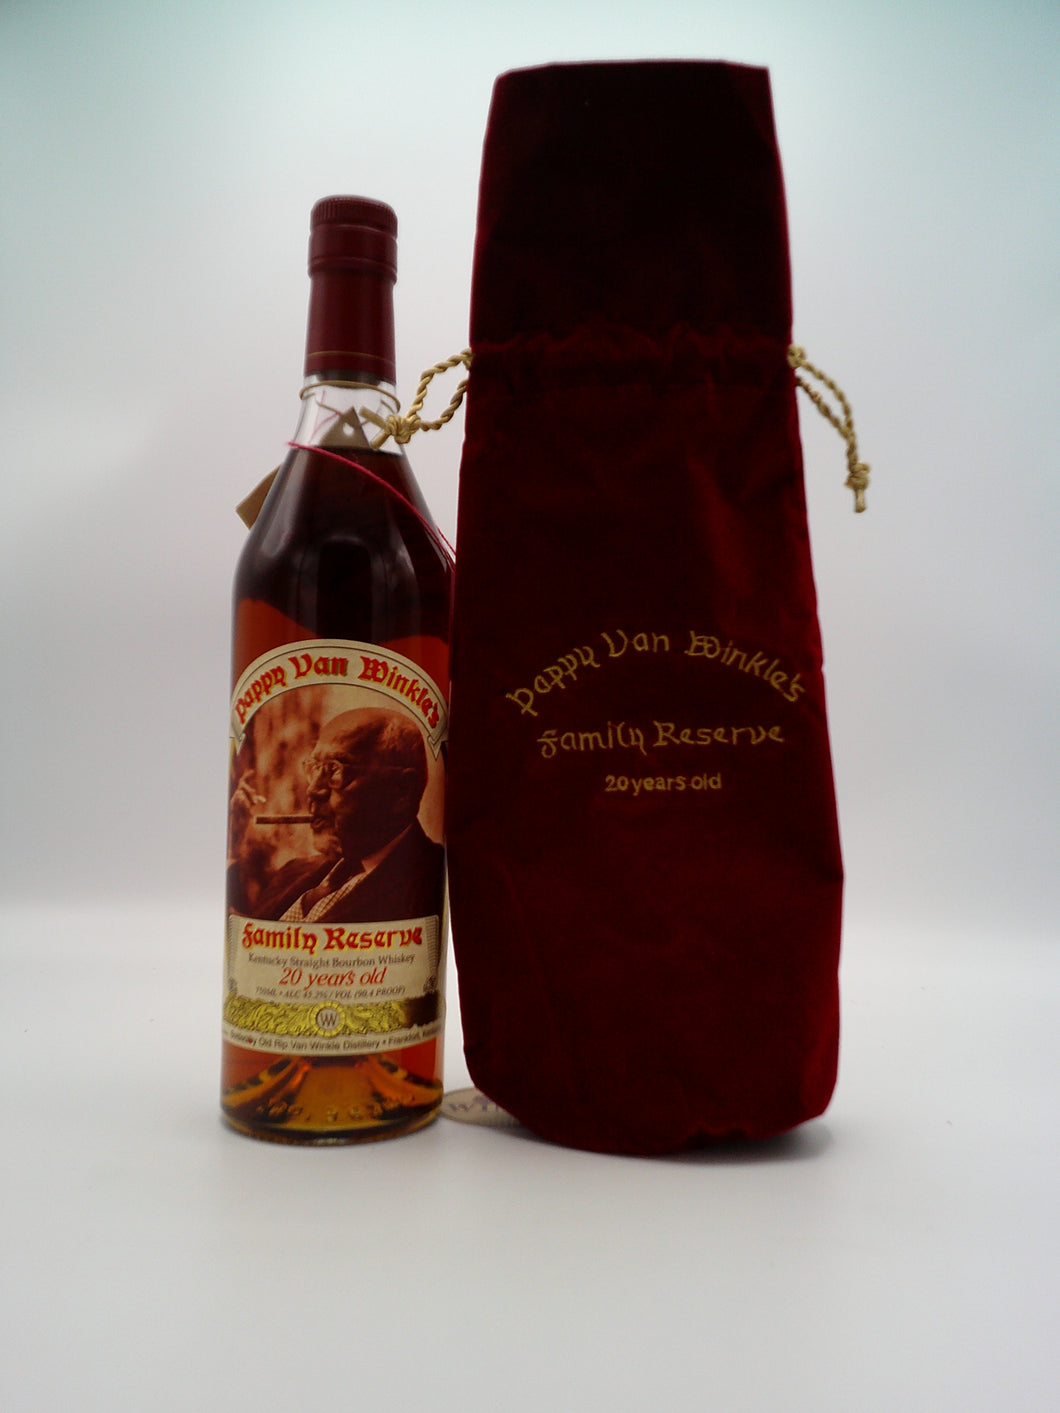 Pappy Van Winkle 20 Year Old Family Reserve 2019